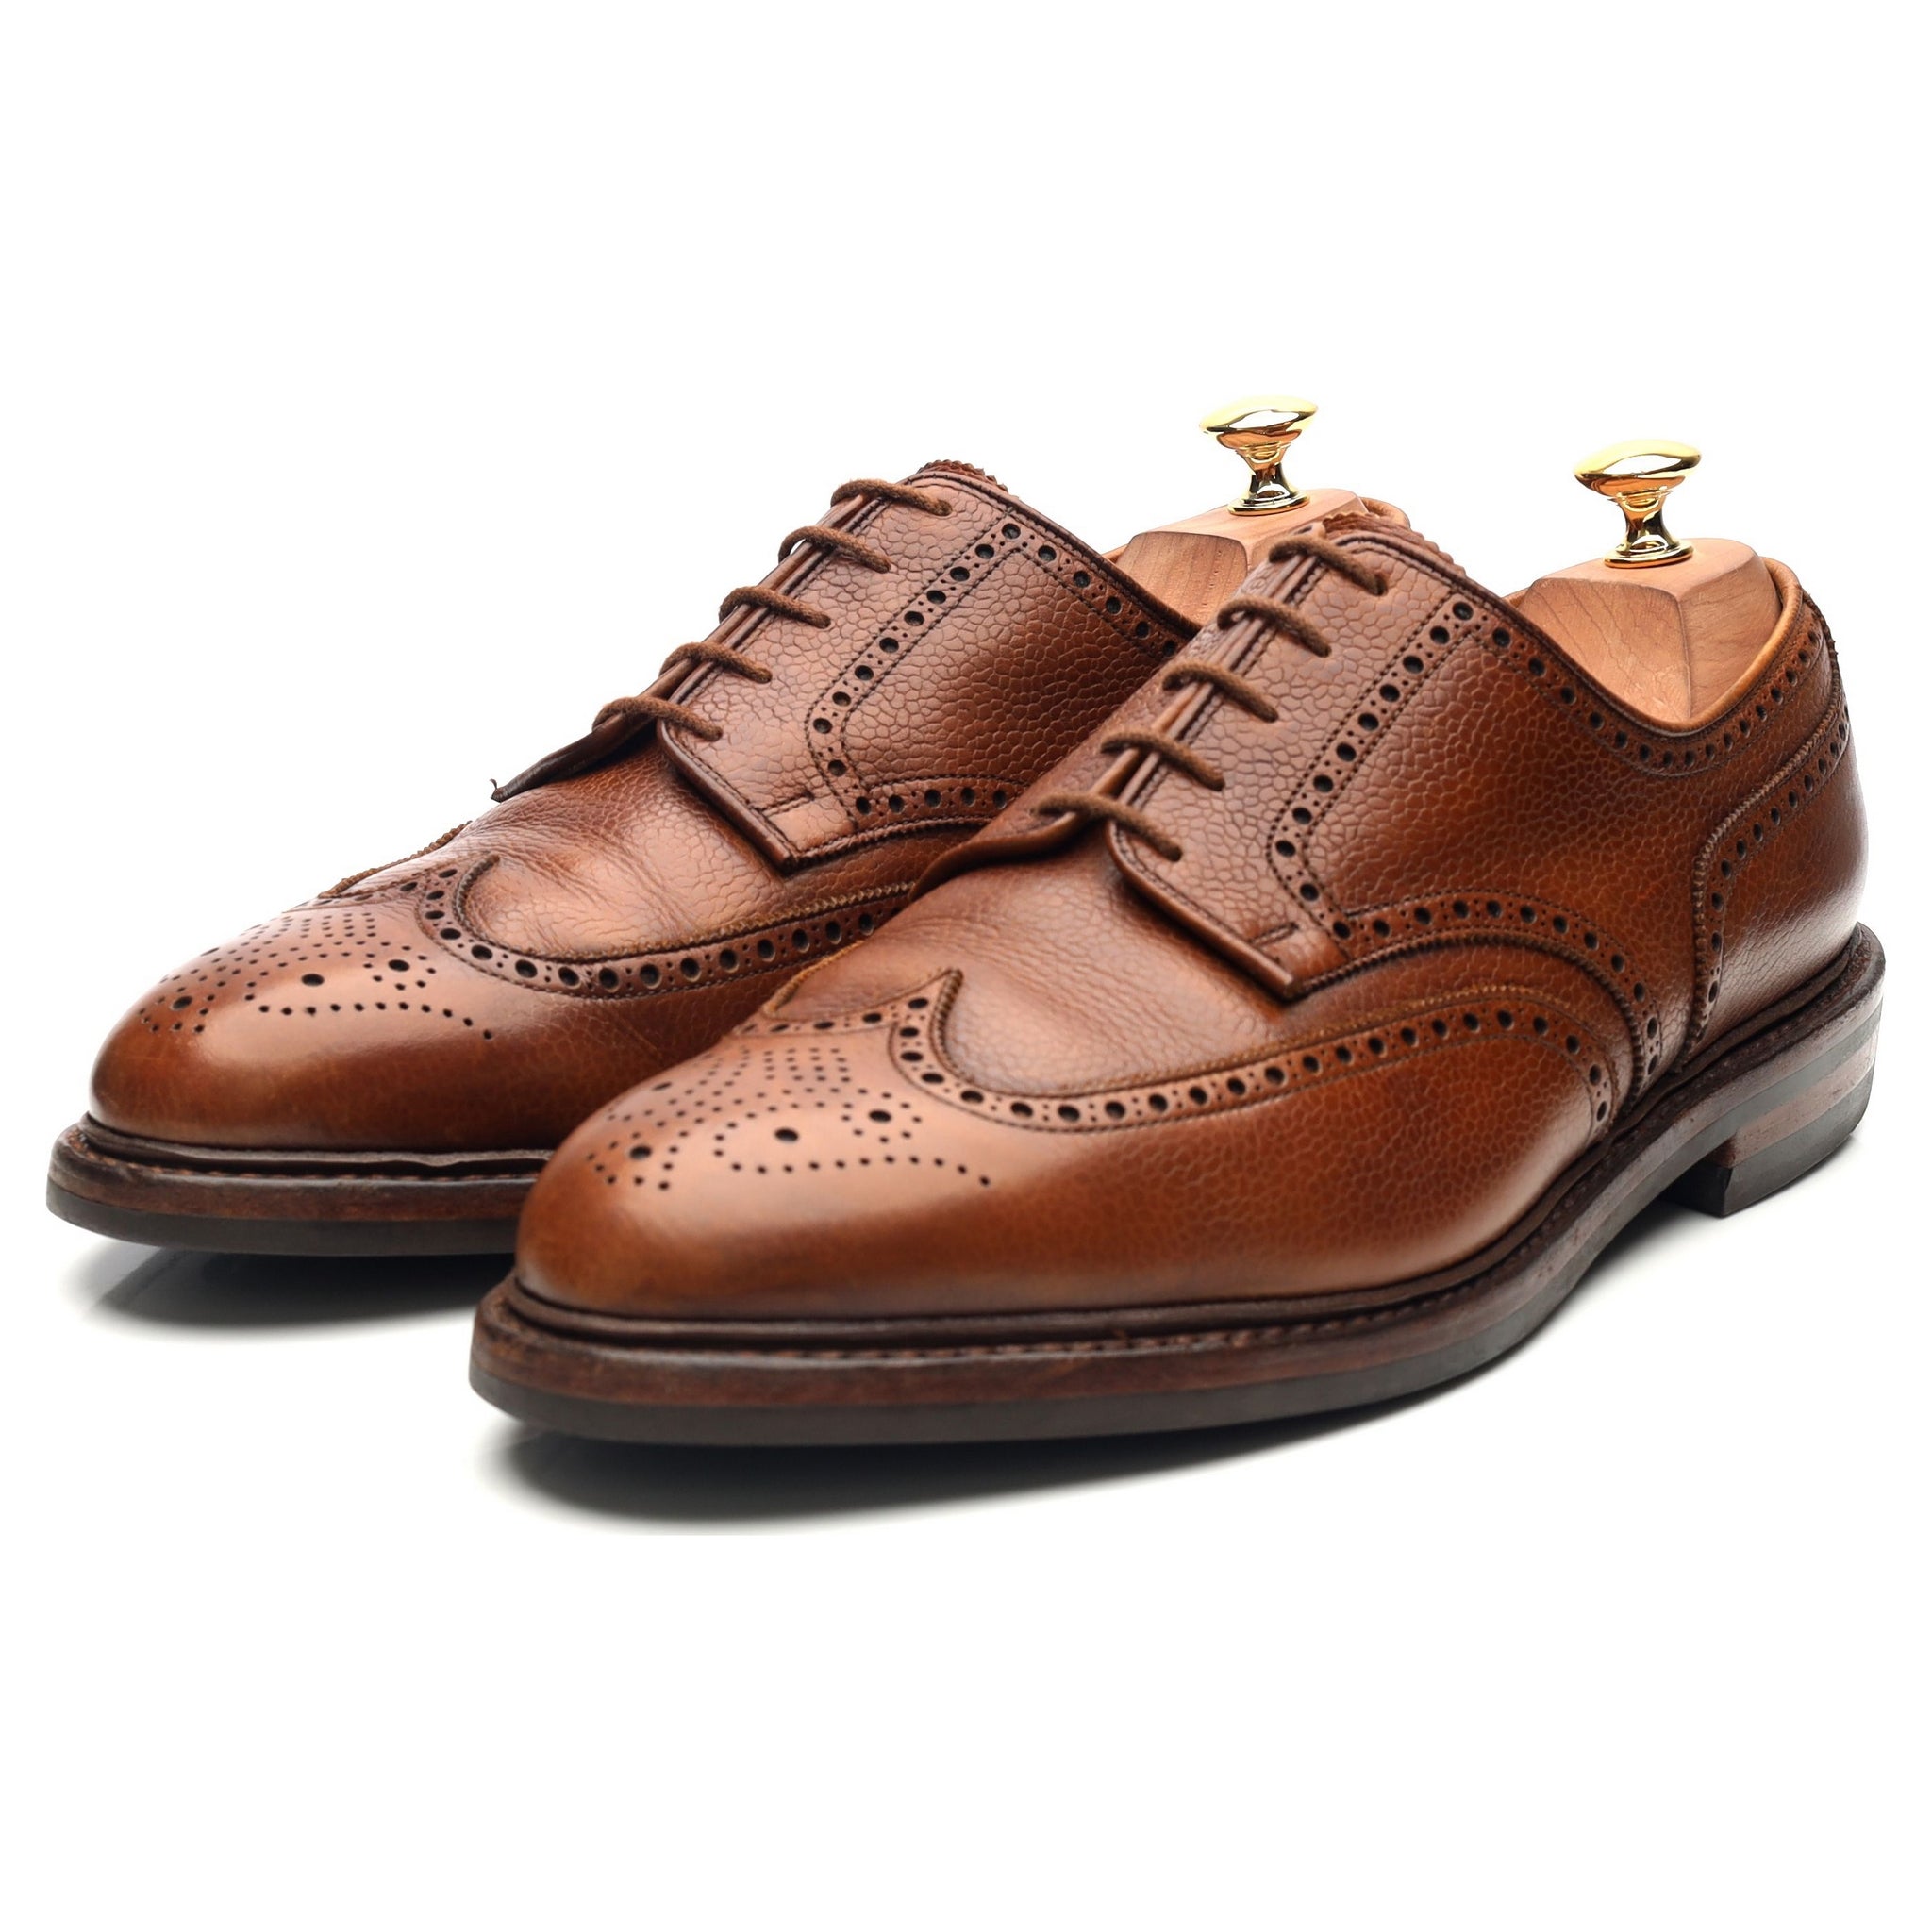 Pembroke' Tan Brown Leather Derby Brogues UK 10 G - Abbot's Shoes